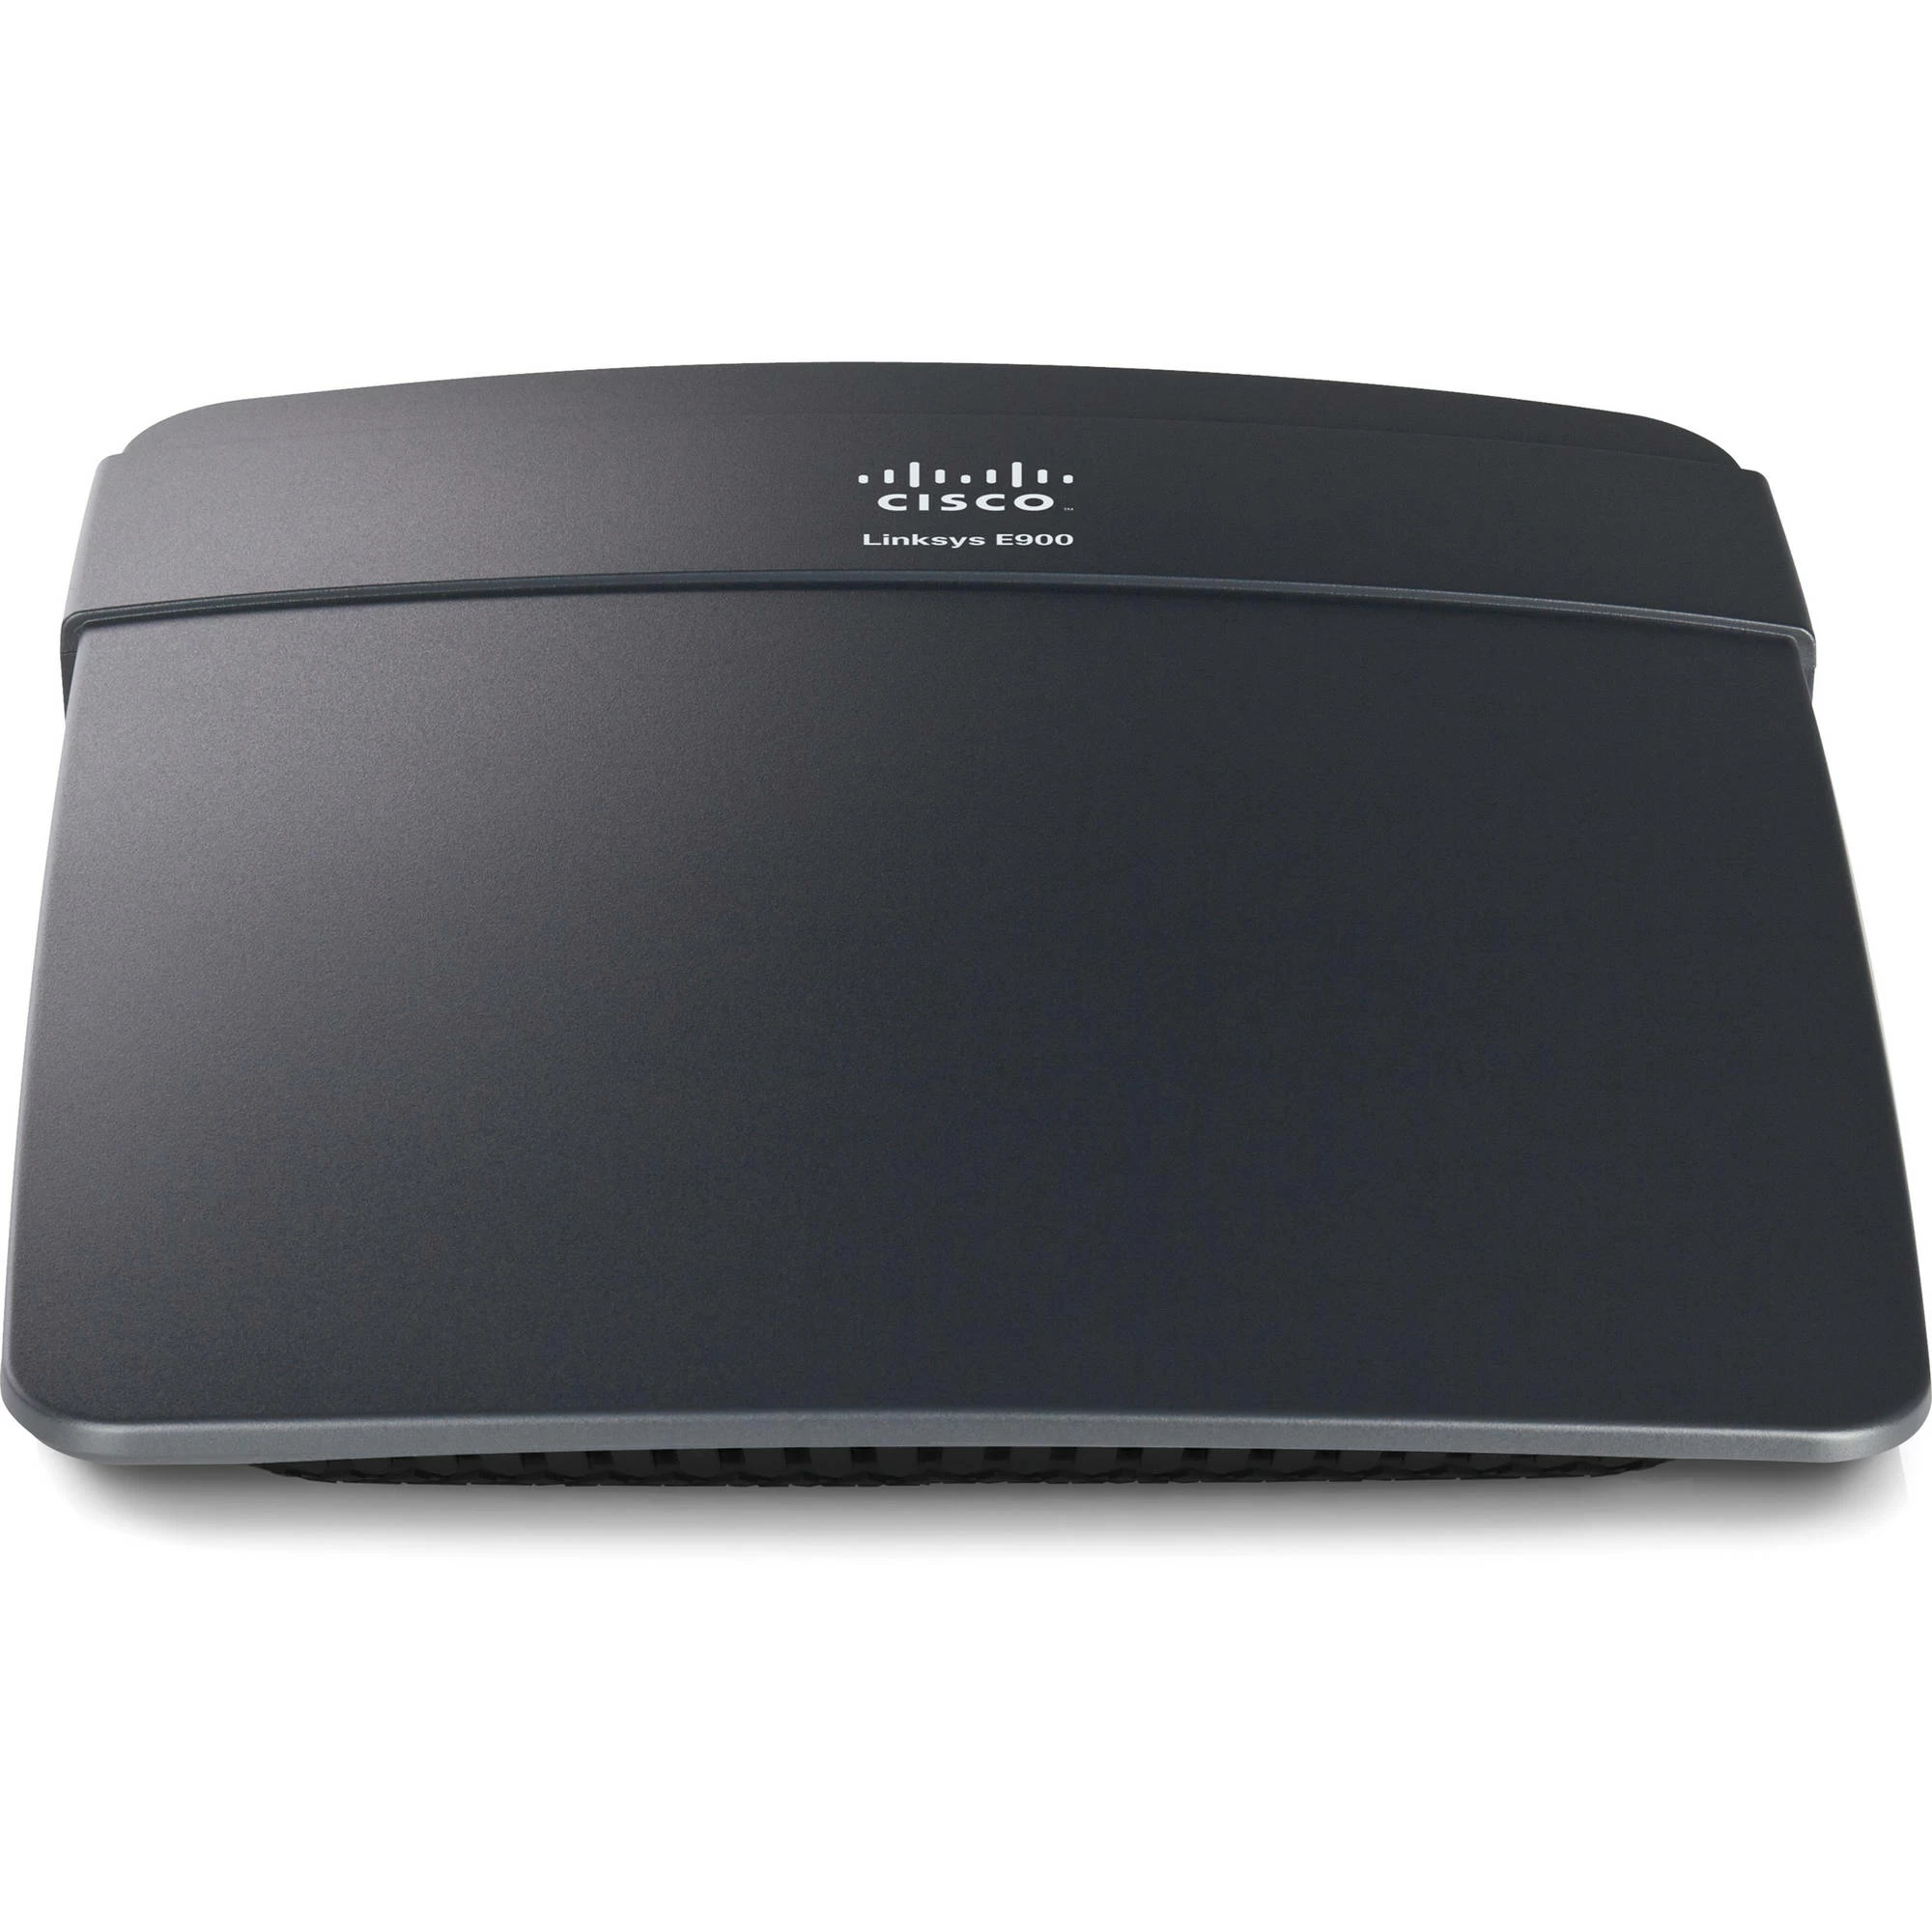 Linksys by Cisco E-Series E900 Wireless-N300 Router